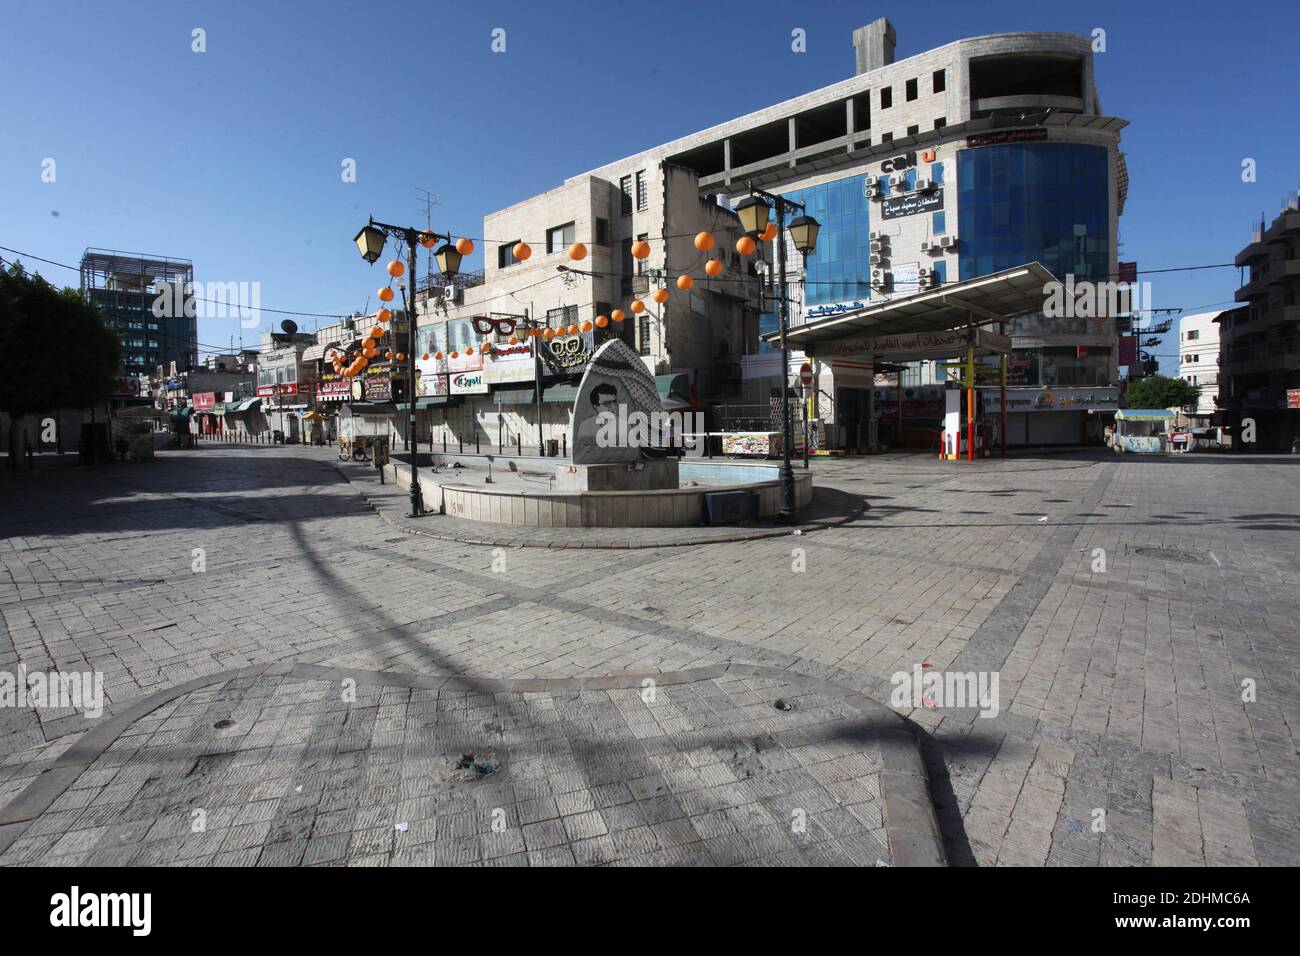 Nablus. 11th Dec, 2020. Photo taken on Dec. 11, 2020 shows an empty street in the West Bank city of Nablus amid the lockdown imposed by the Palestinian authorities. Palestine reported 1,743 new coronavirus cases, taking the tally of infections in the Palestinian territories to 121,157, including 1,029 deaths and 94,349 recoveries. Four Palestinian districts in the West Bank, including Nablus, Tulkarm, Bethlehem, and Hebron, went into a full weeklong lockdown that began on Thursday night. Credit: Nidal Eshtayeh/Xinhua/Alamy Live News Stock Photo